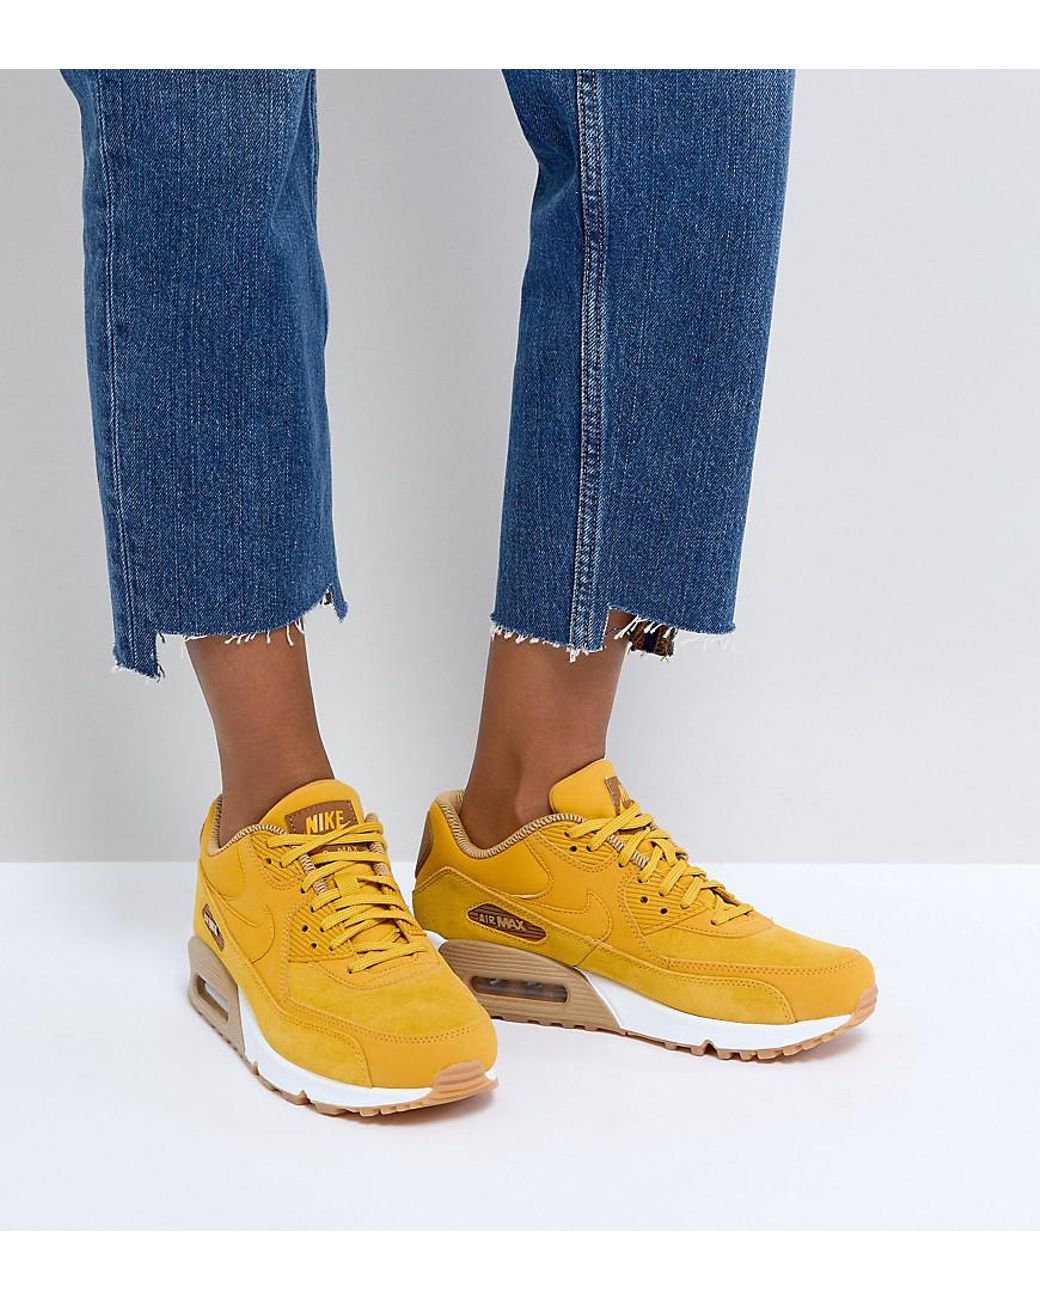 Nike Air Max 90 Mustard Suede Trainers With Gum Sole in Yellow | Lyst UK